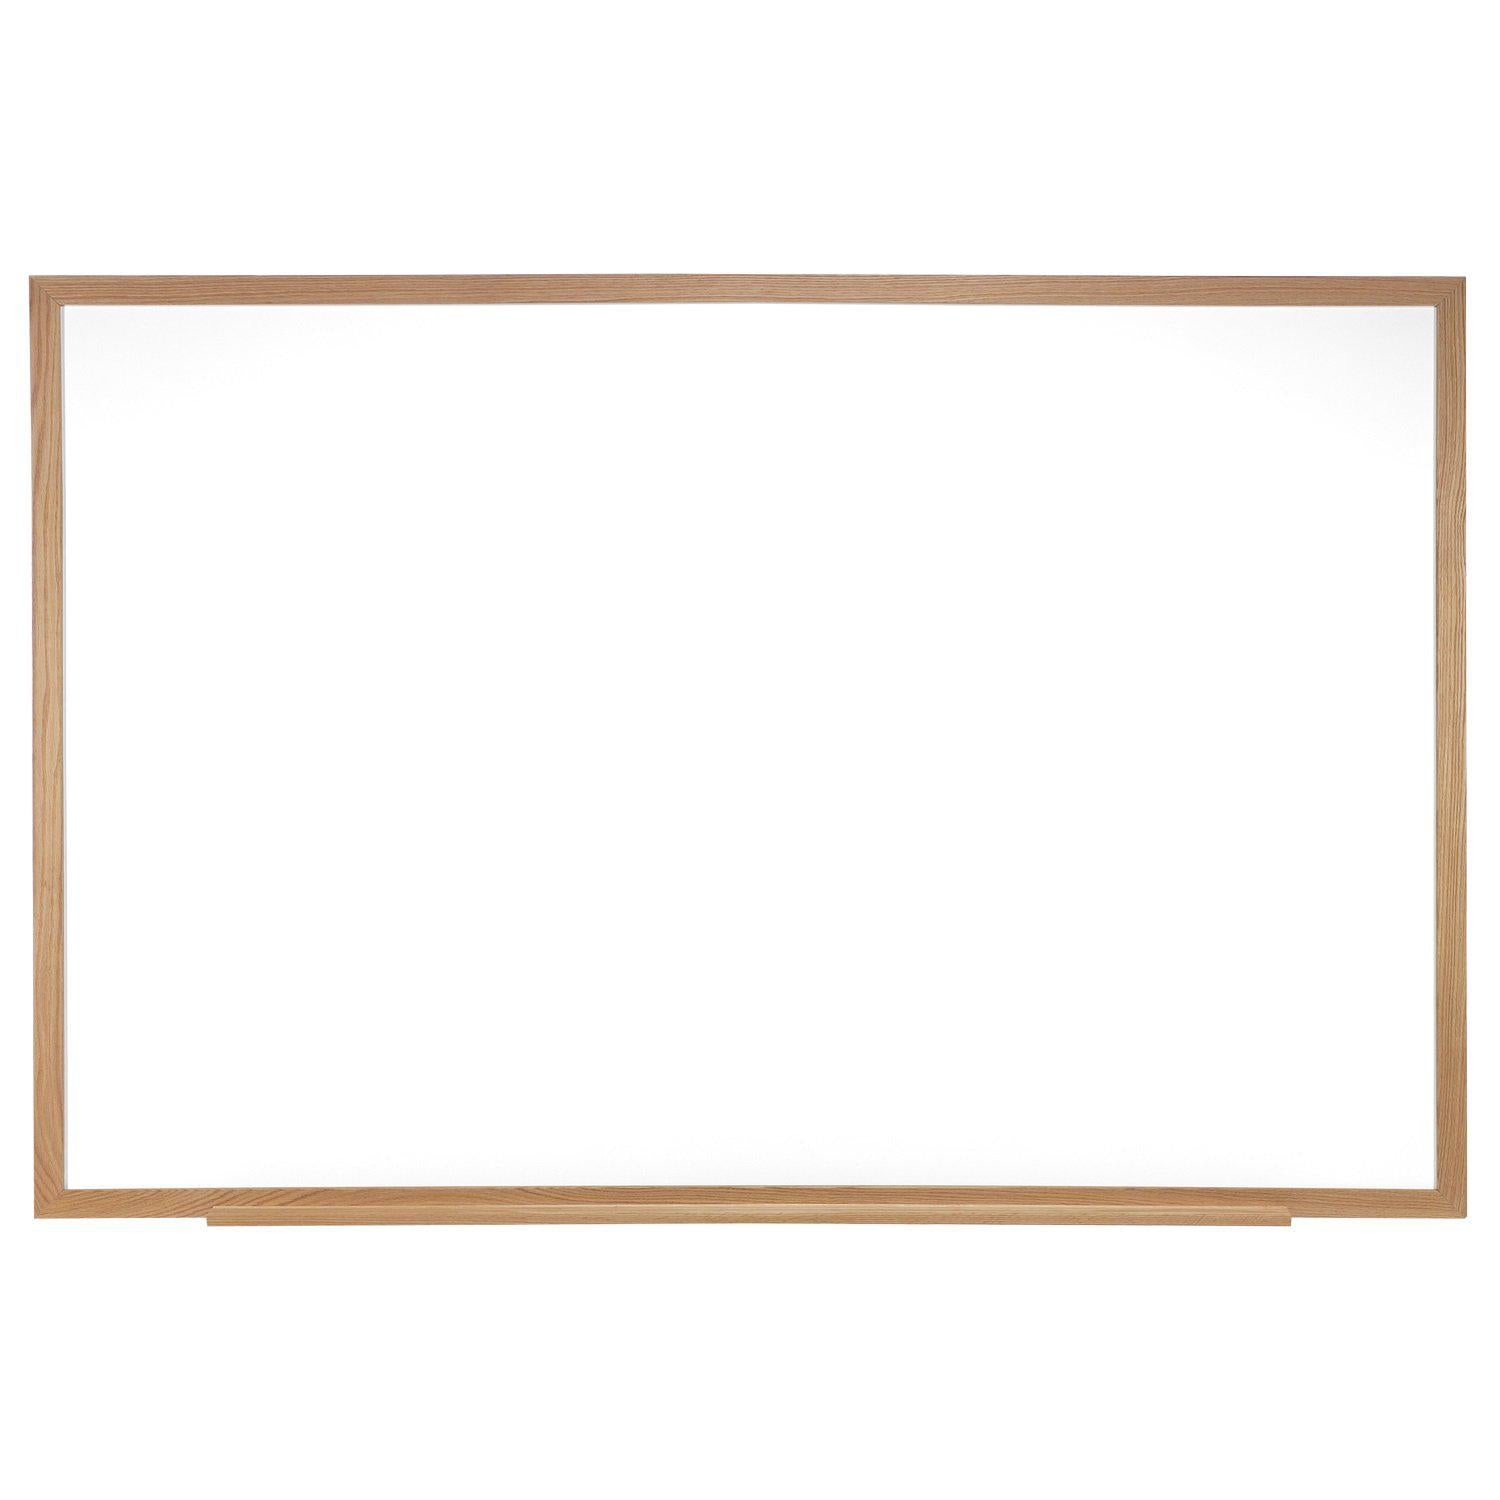 Magnetic Porcelain Whiteboard with Detachable Marker Tray, Wood Frame, 4' H x 12' W, LIFETIME WARRANTY